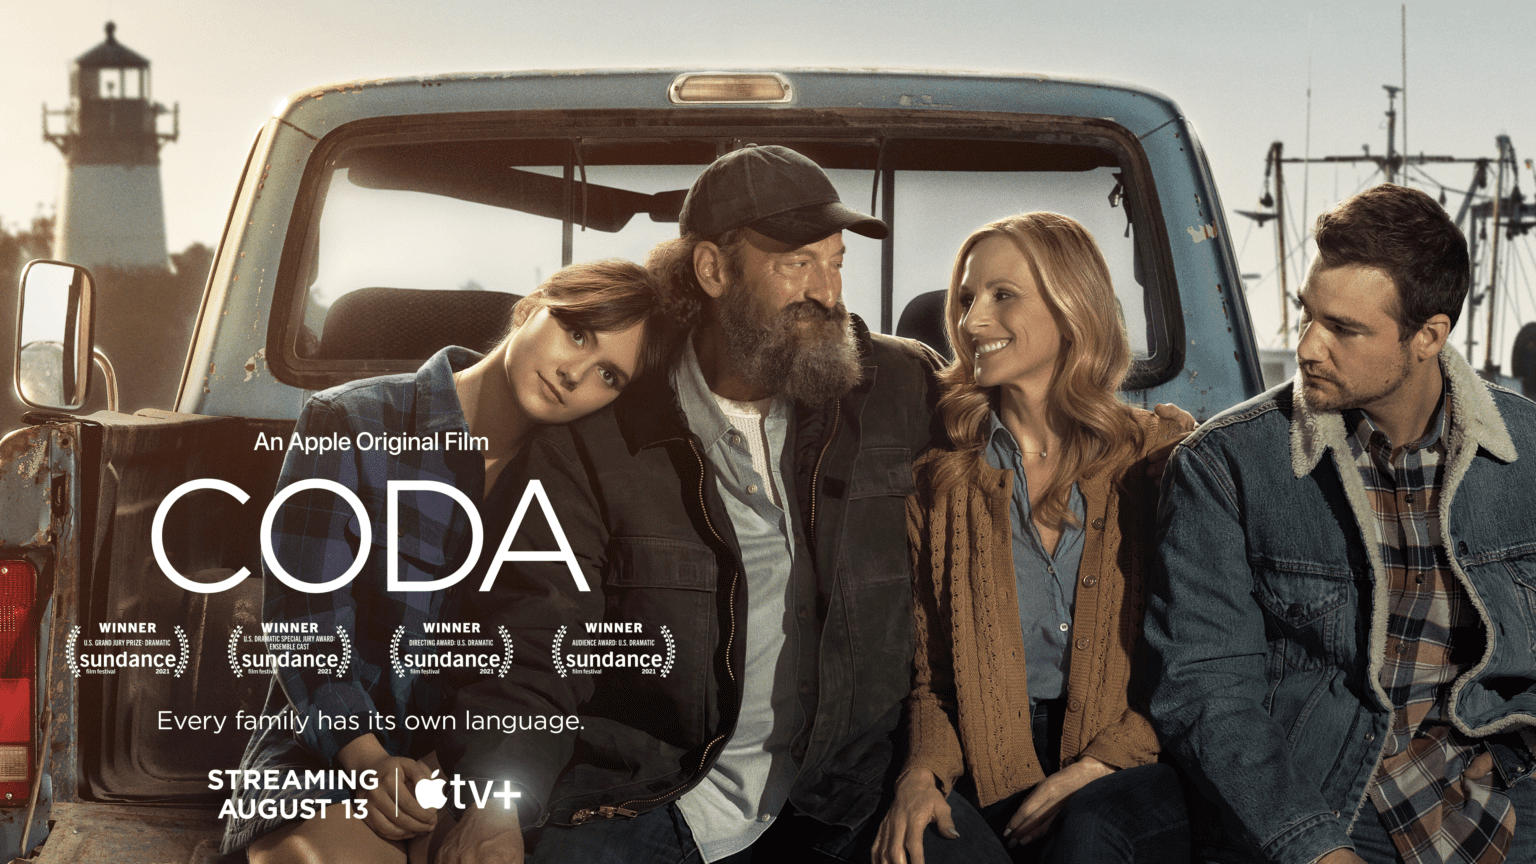 Sundance's CODA to premiere in theaters and Apple TV+ on Aug. 13